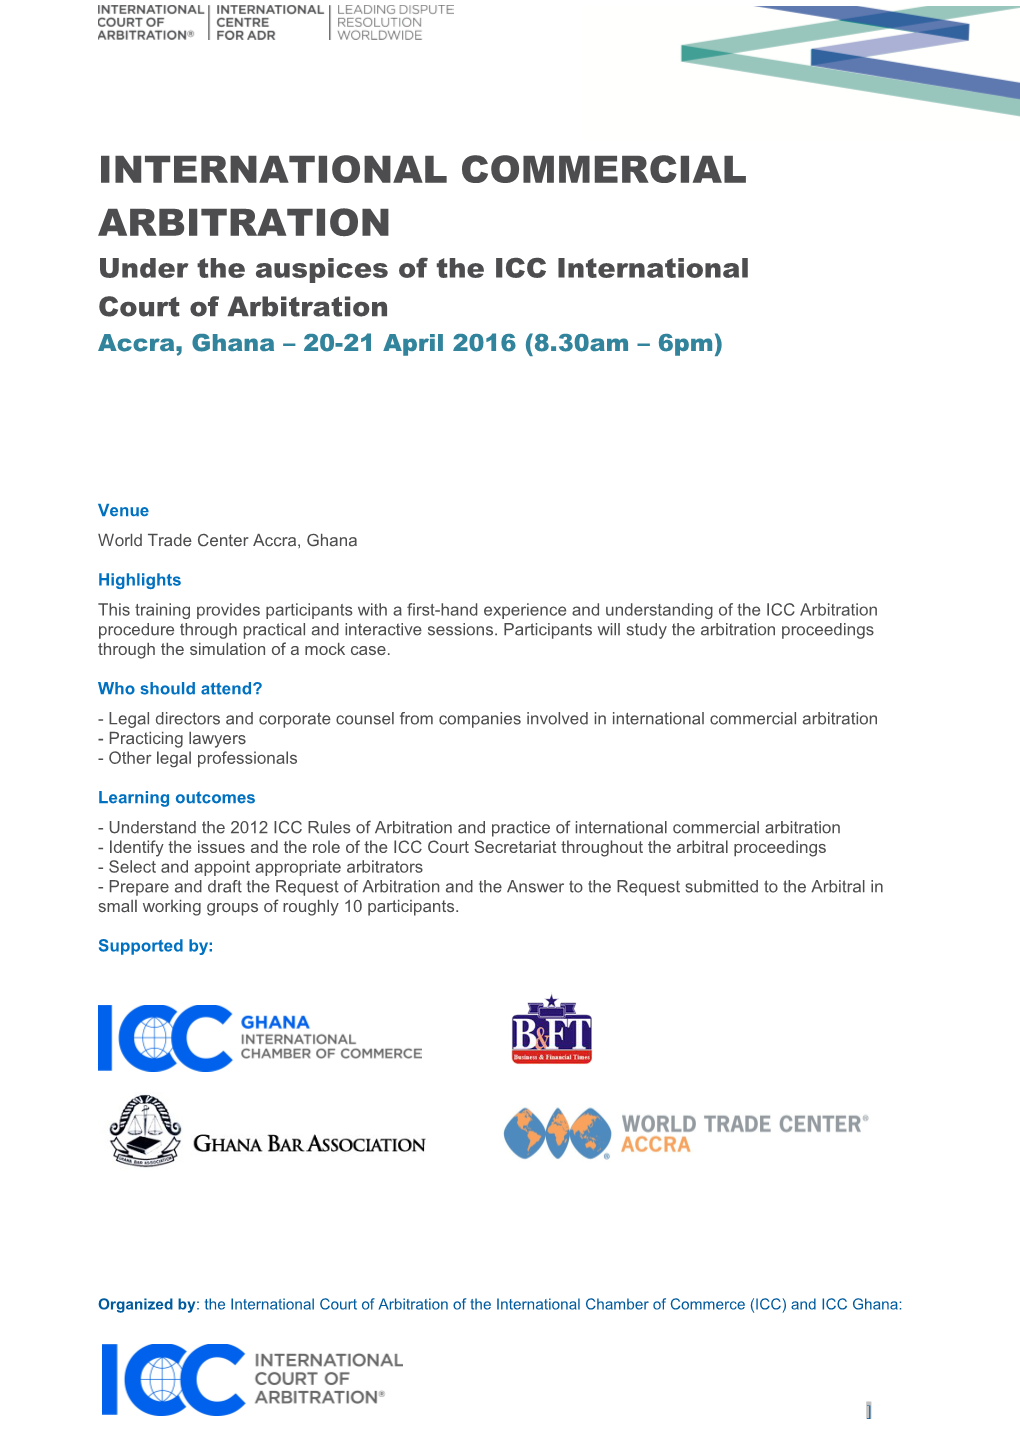 Under the Auspices of the ICC International Court of Arbitration